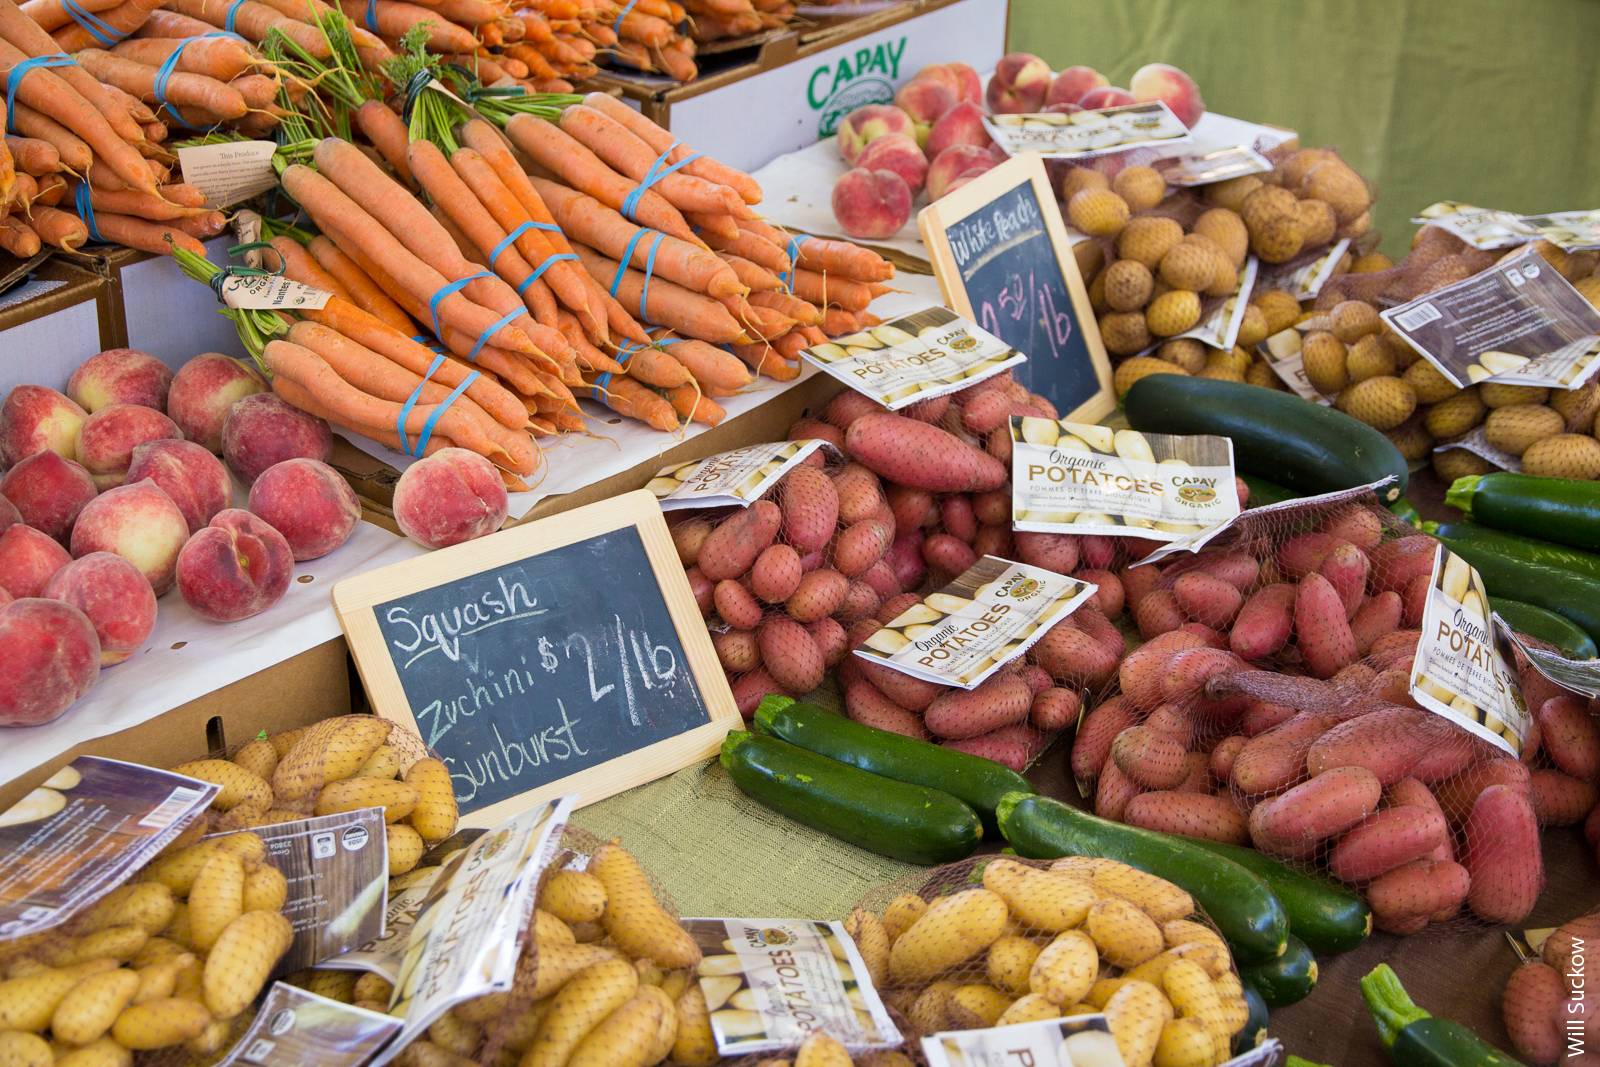 Farmers Market Nutrition Program vouchers are issued once a year for use between May and November at WIC-approved certified farmers markets.